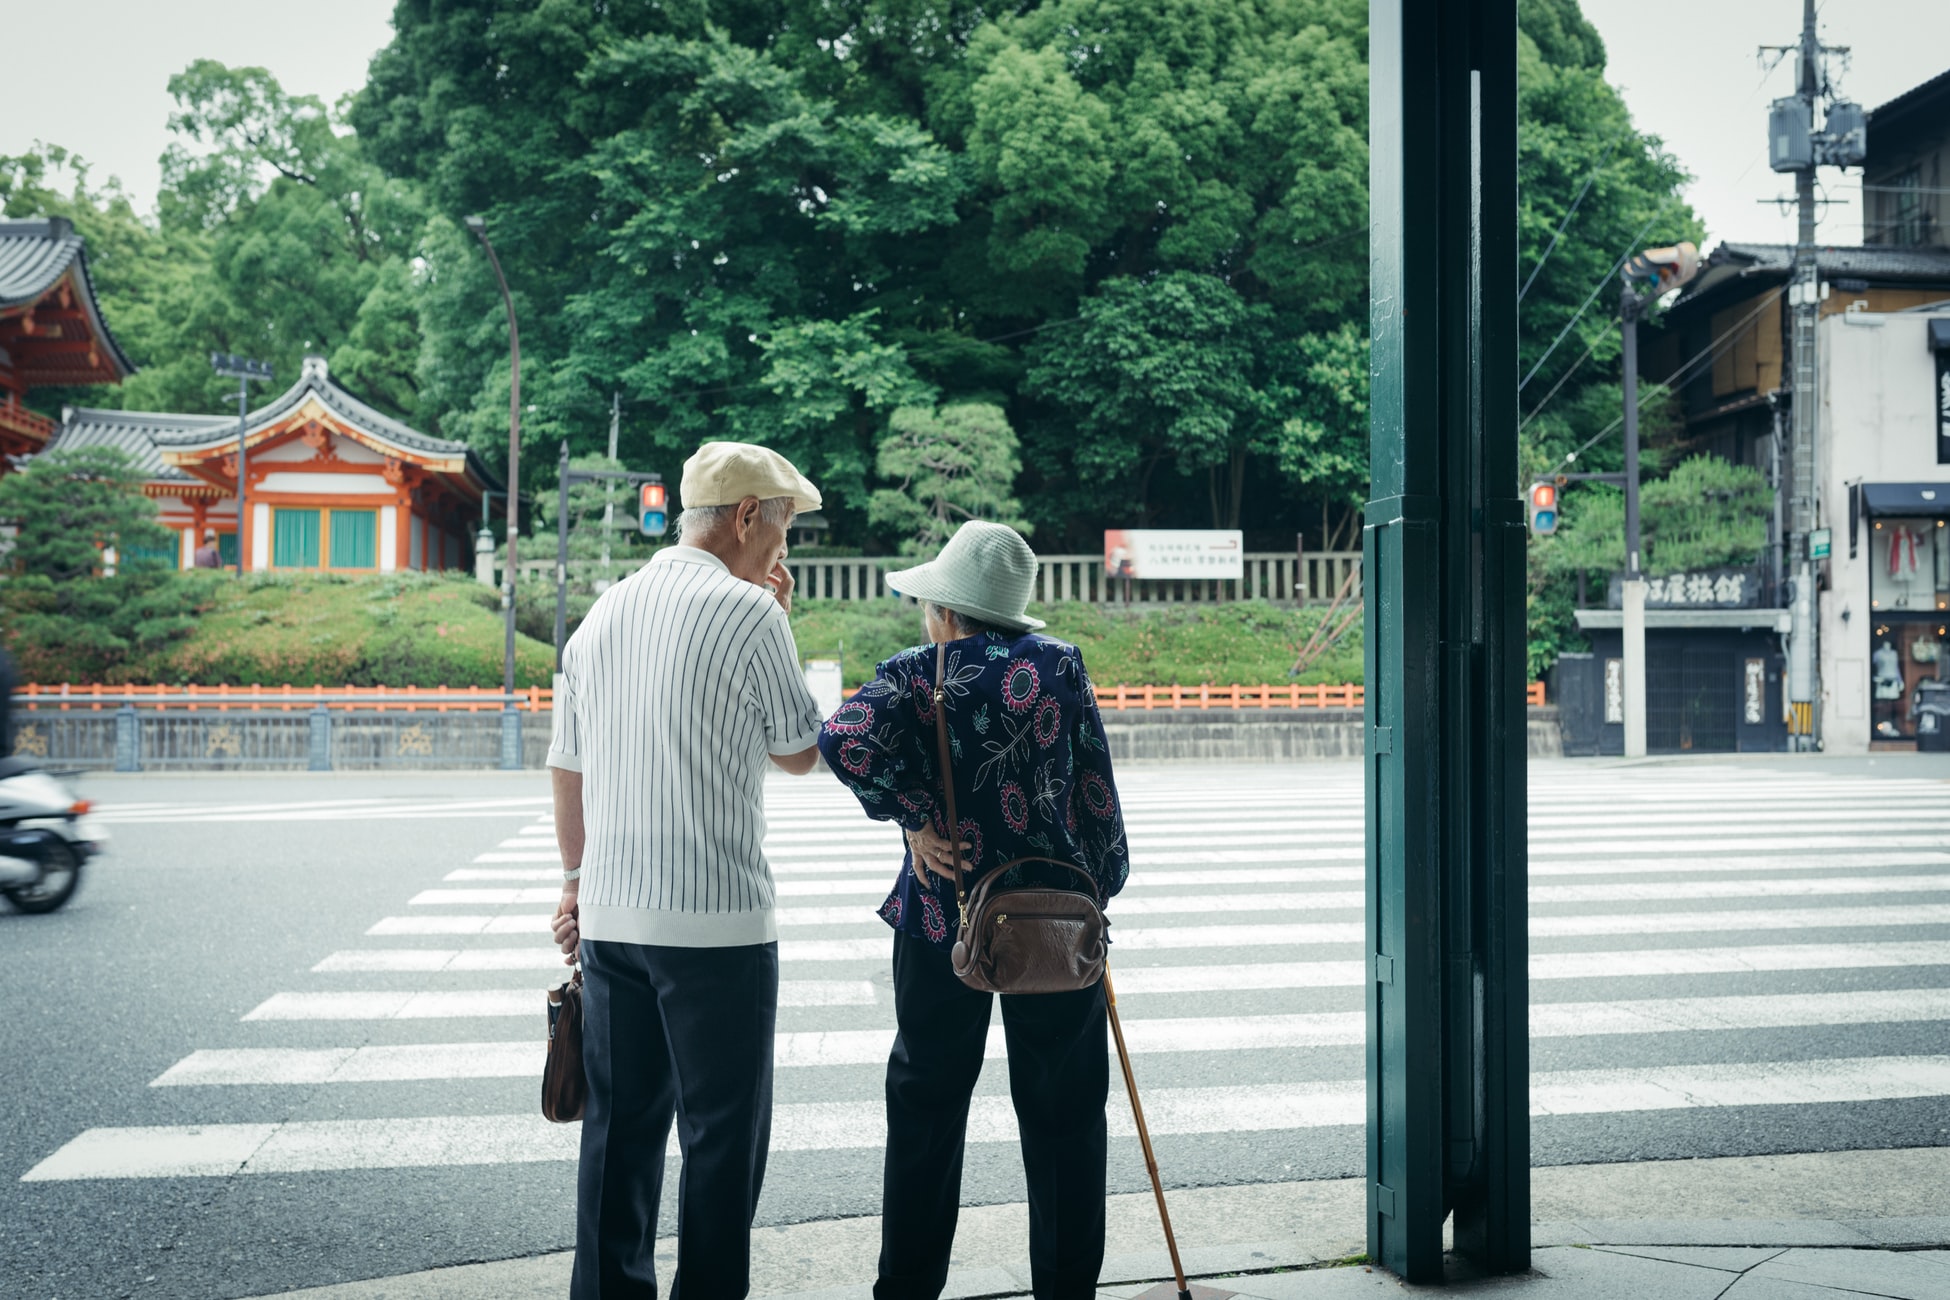 The population is decreasing and aging in Japan. Illustration photo: Joey Huang – Unsplash